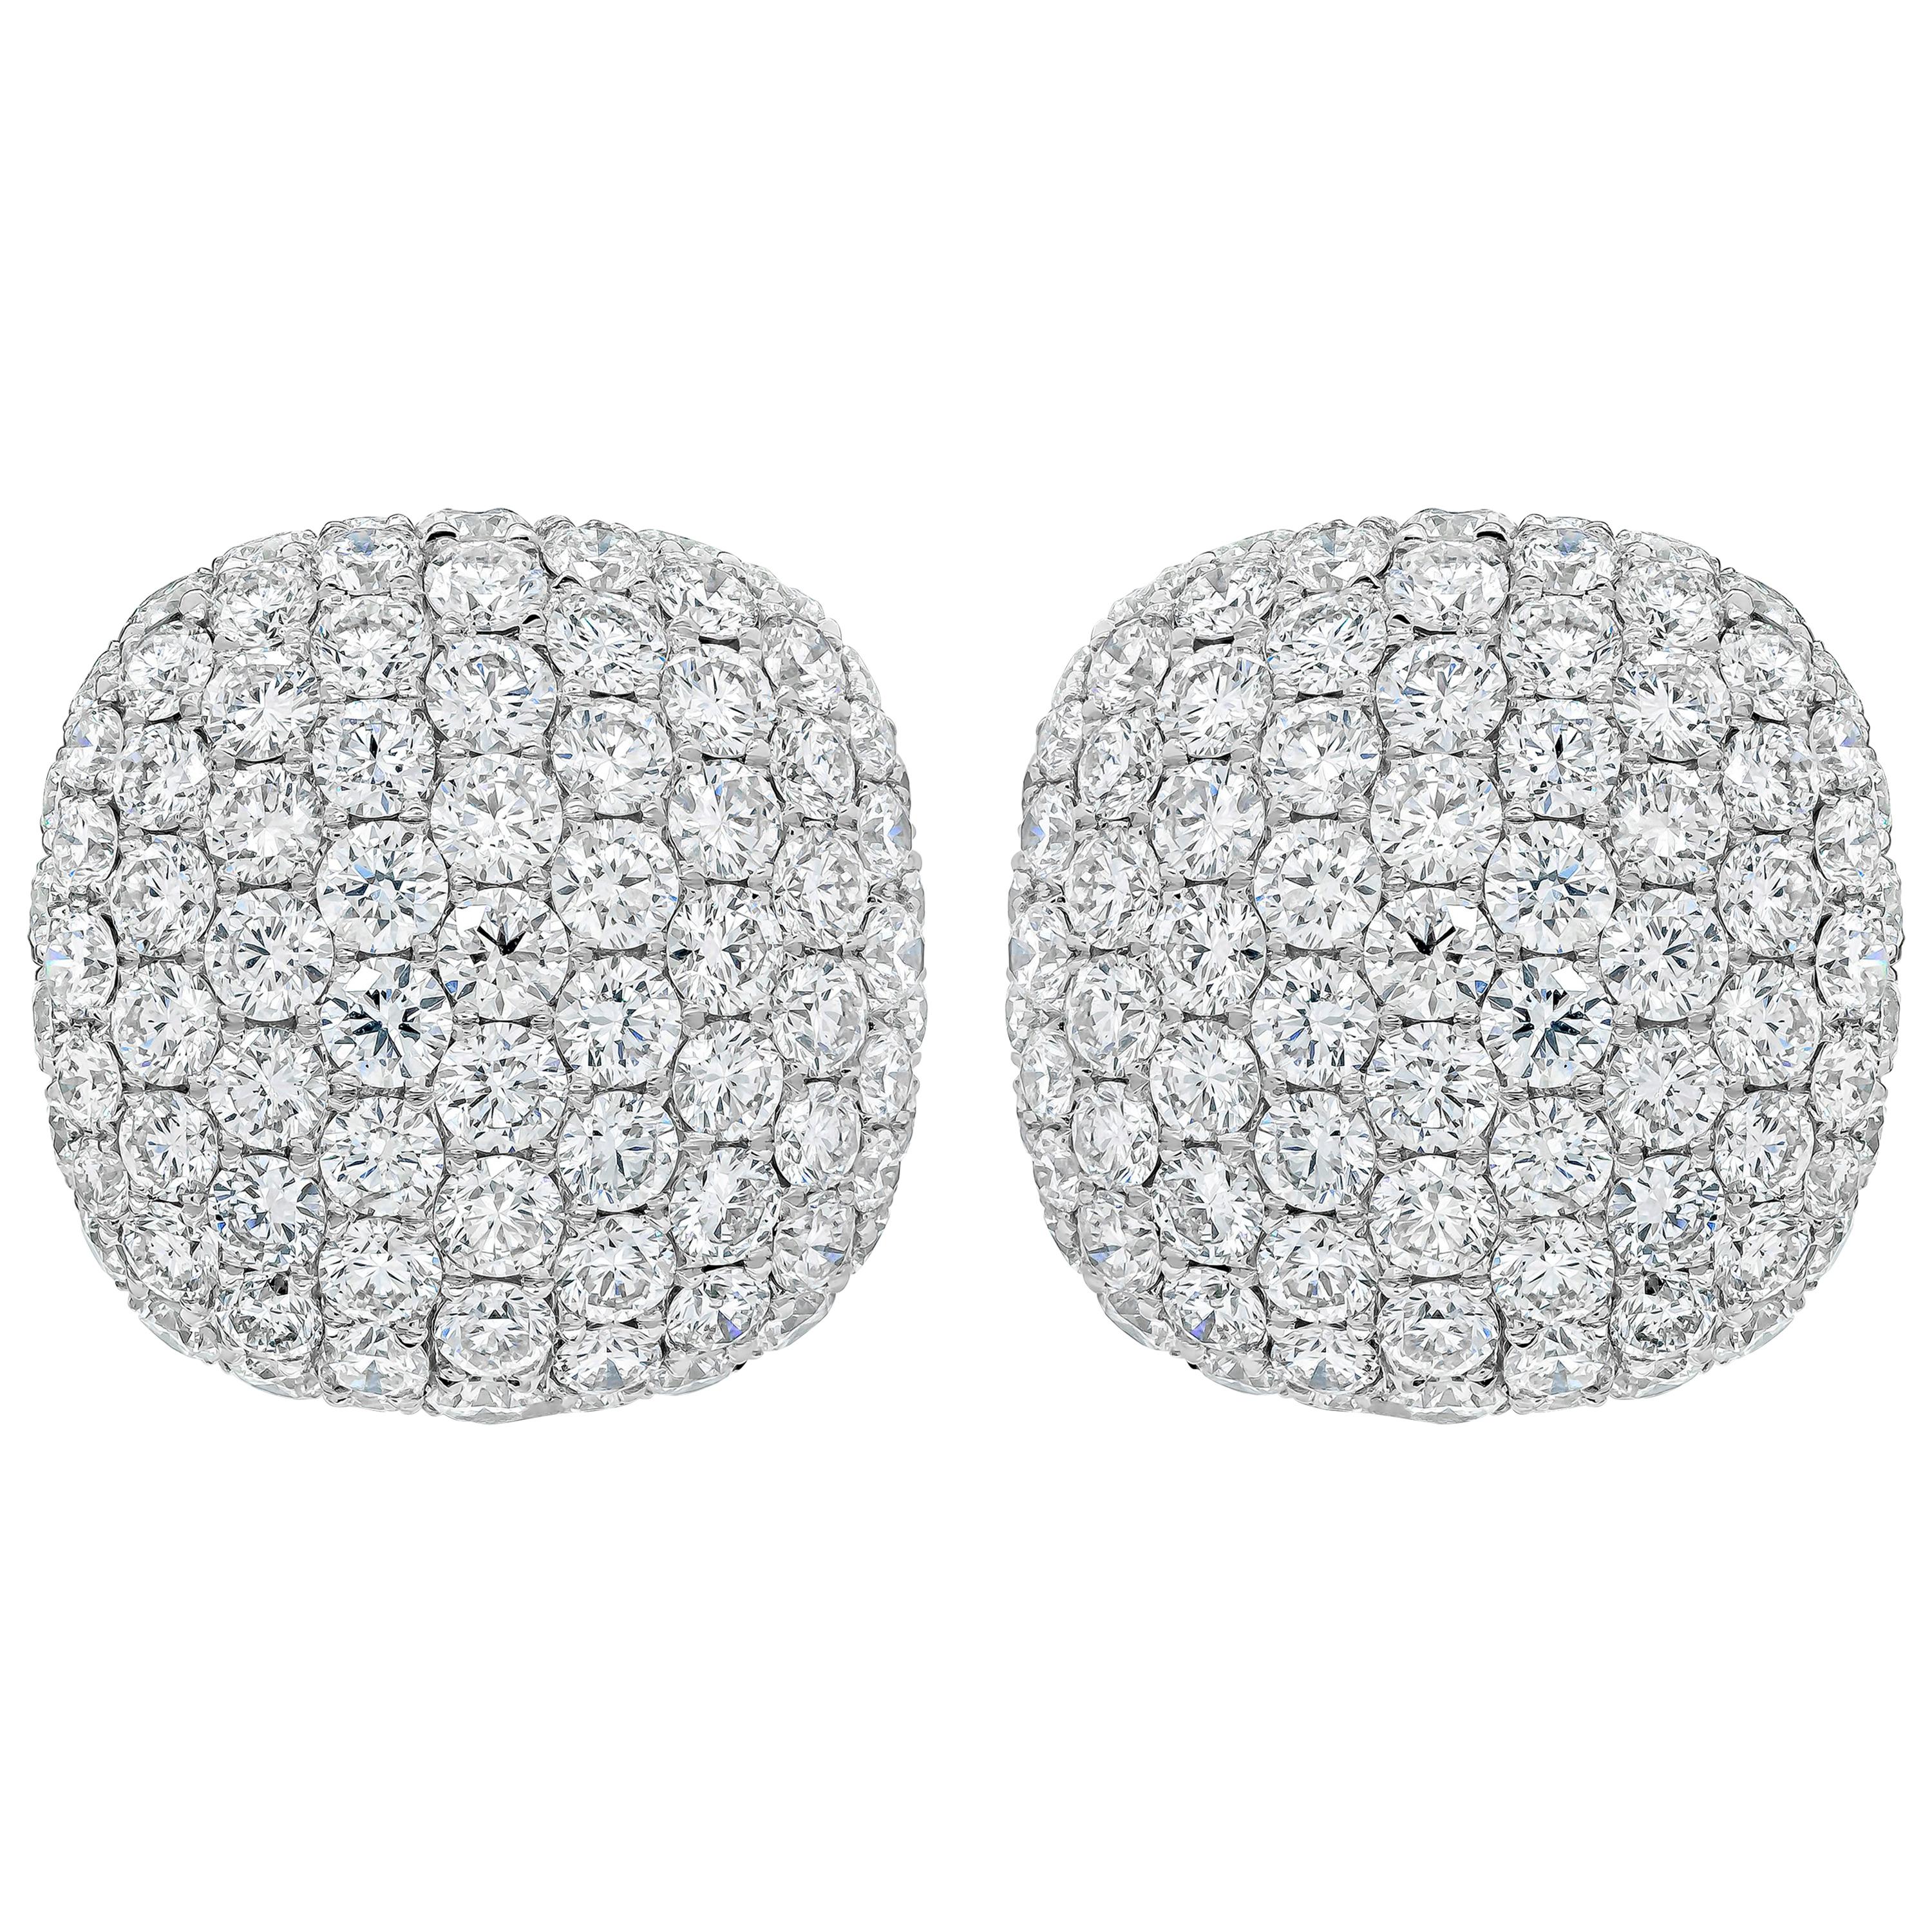 5.52 Carats Total Round Micro-Pave Diamond Cushion Shape Clip-on Hoops Earrings